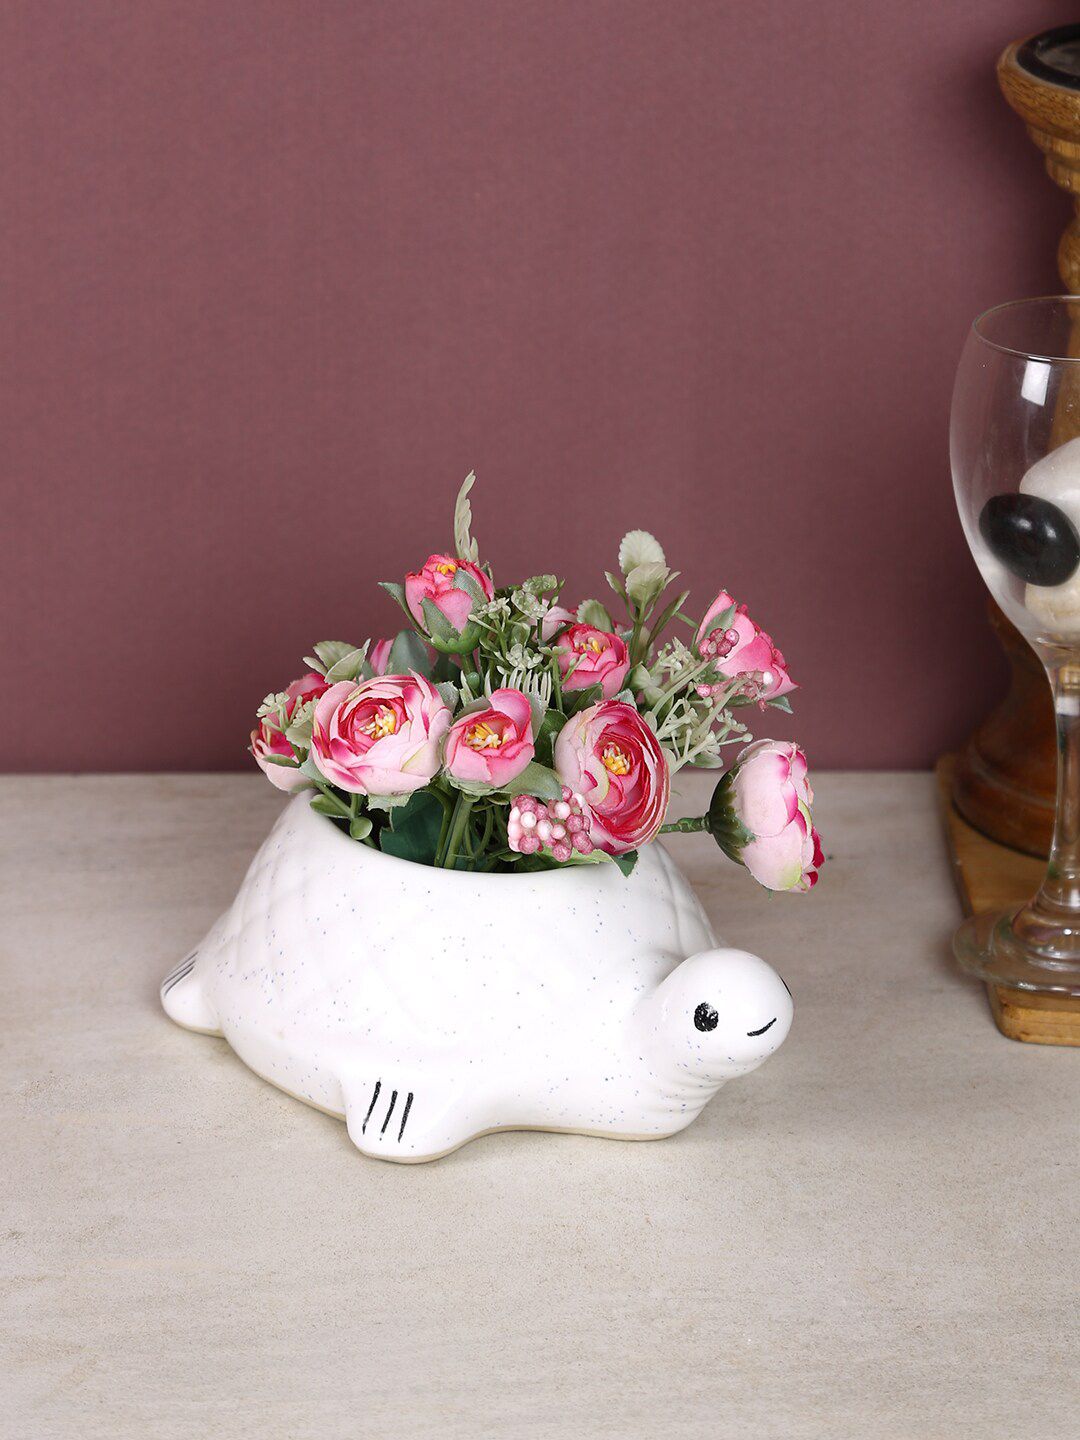 Aapno Rajasthan White Solid Tortoise Shaped Ceremic Planter Price in India